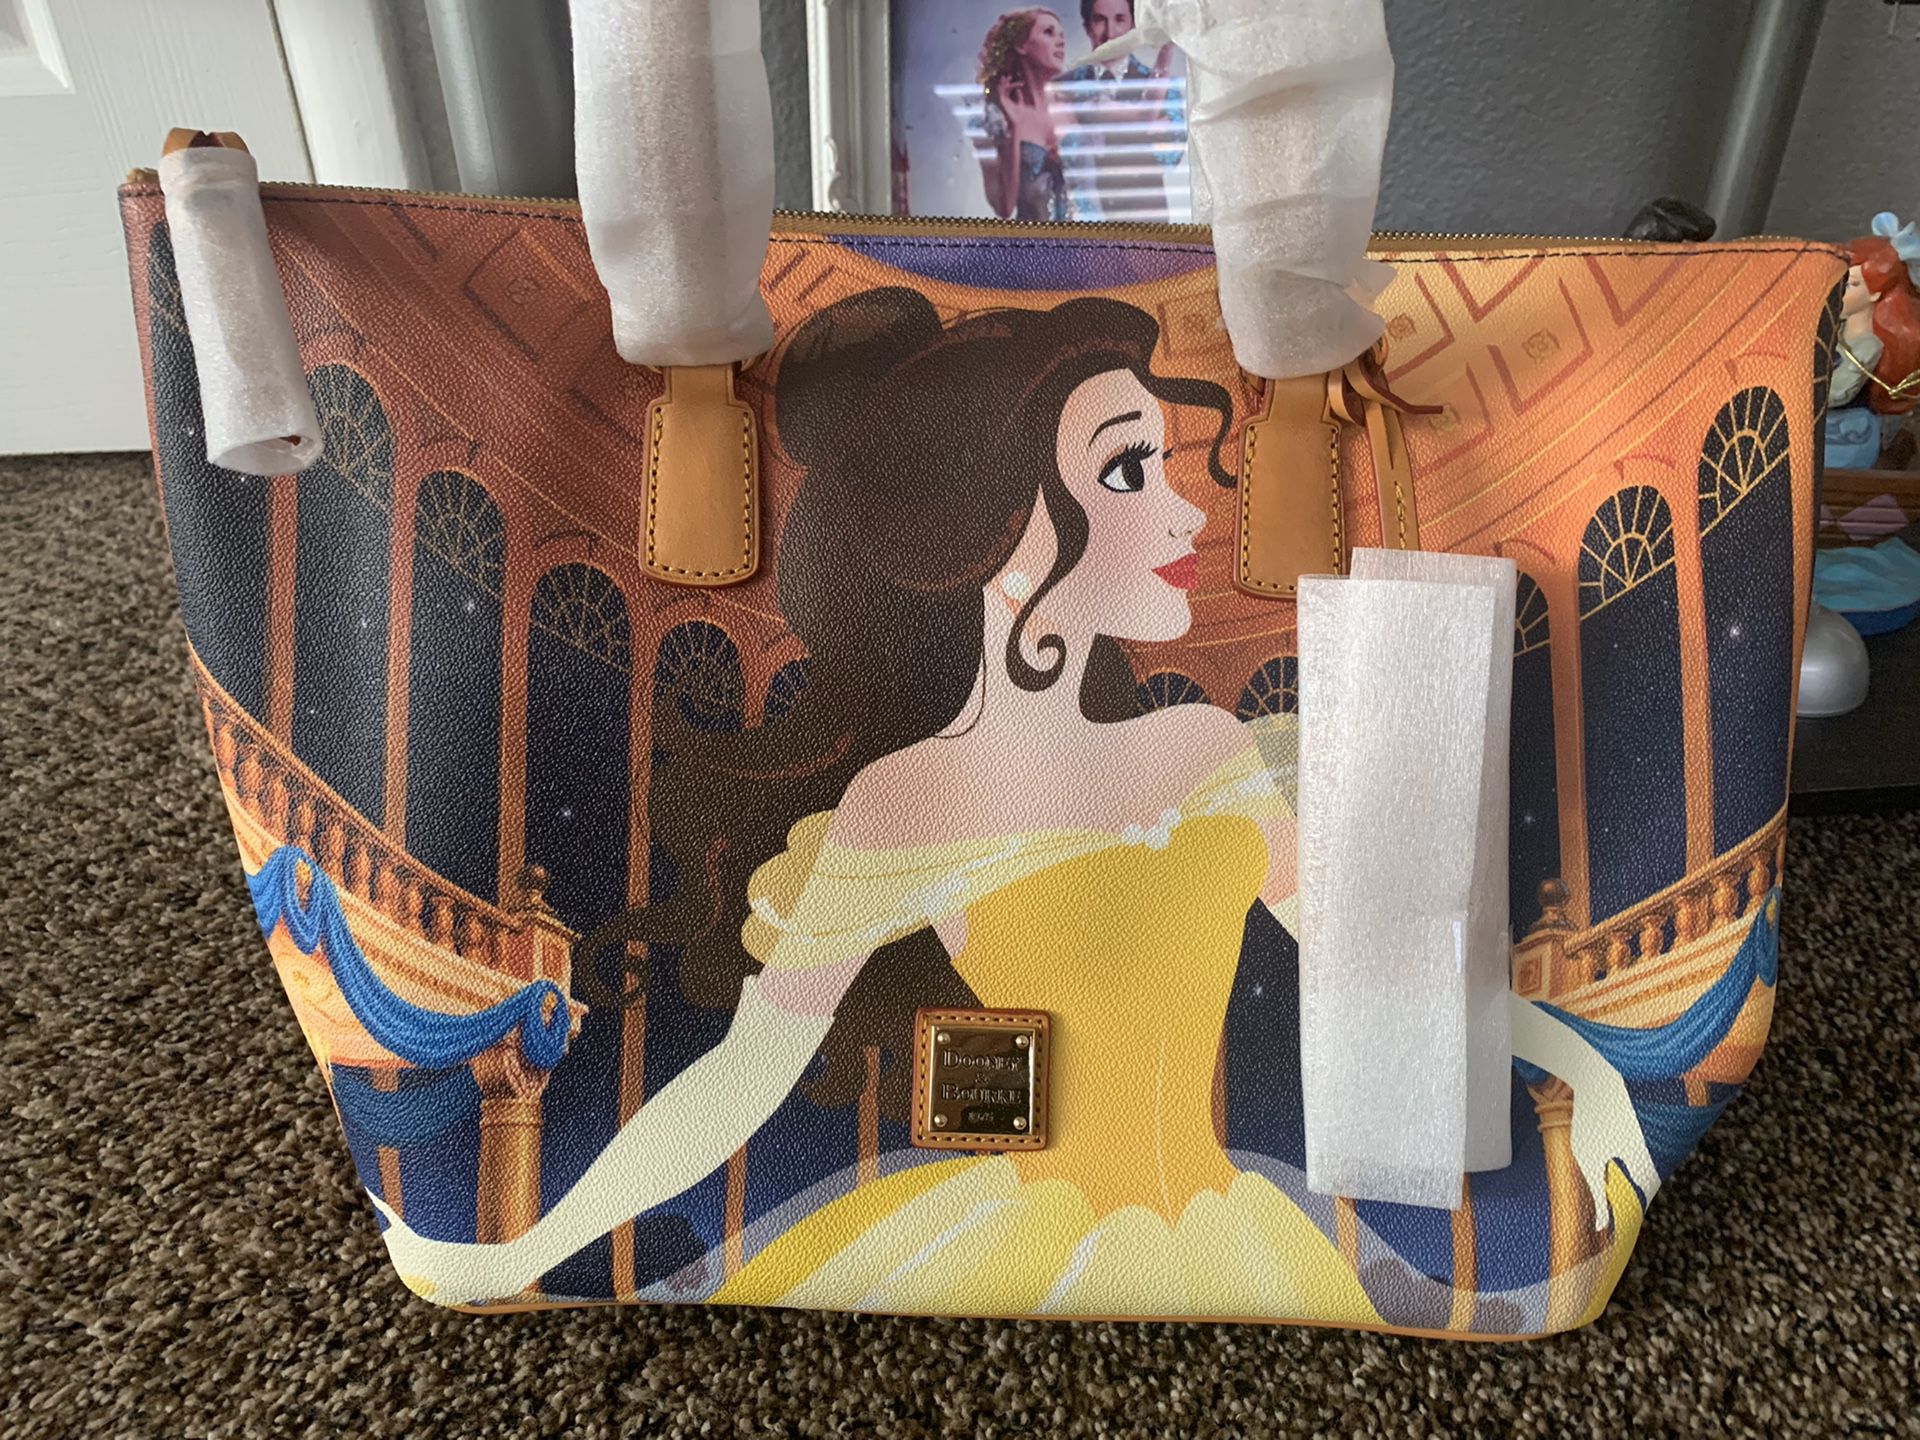 Dooney and Bourke Beauty and the Beast Belle Tote Bag Disney